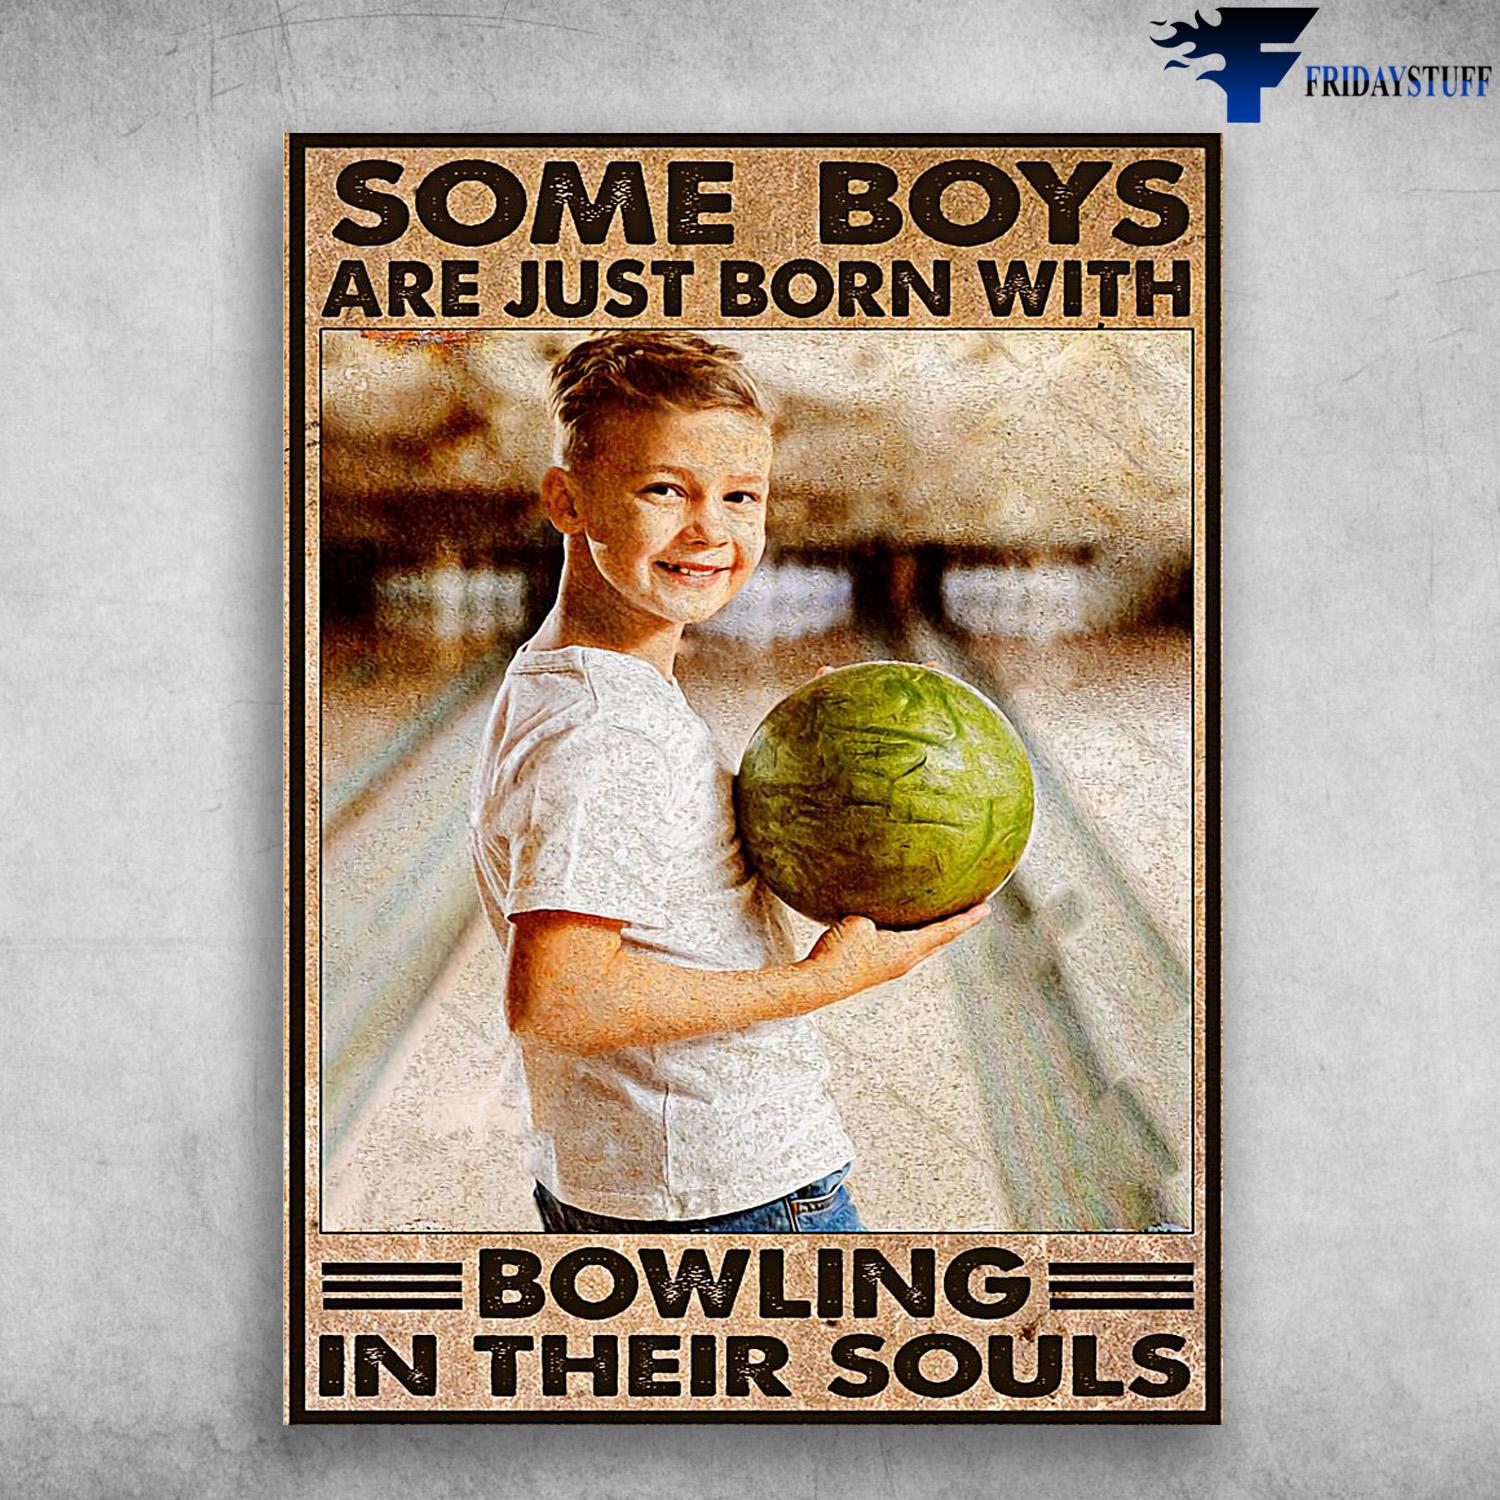 Bowling Boy, Bowling Poster, Some Boys Are Just Born, With Bowling In Their Souls